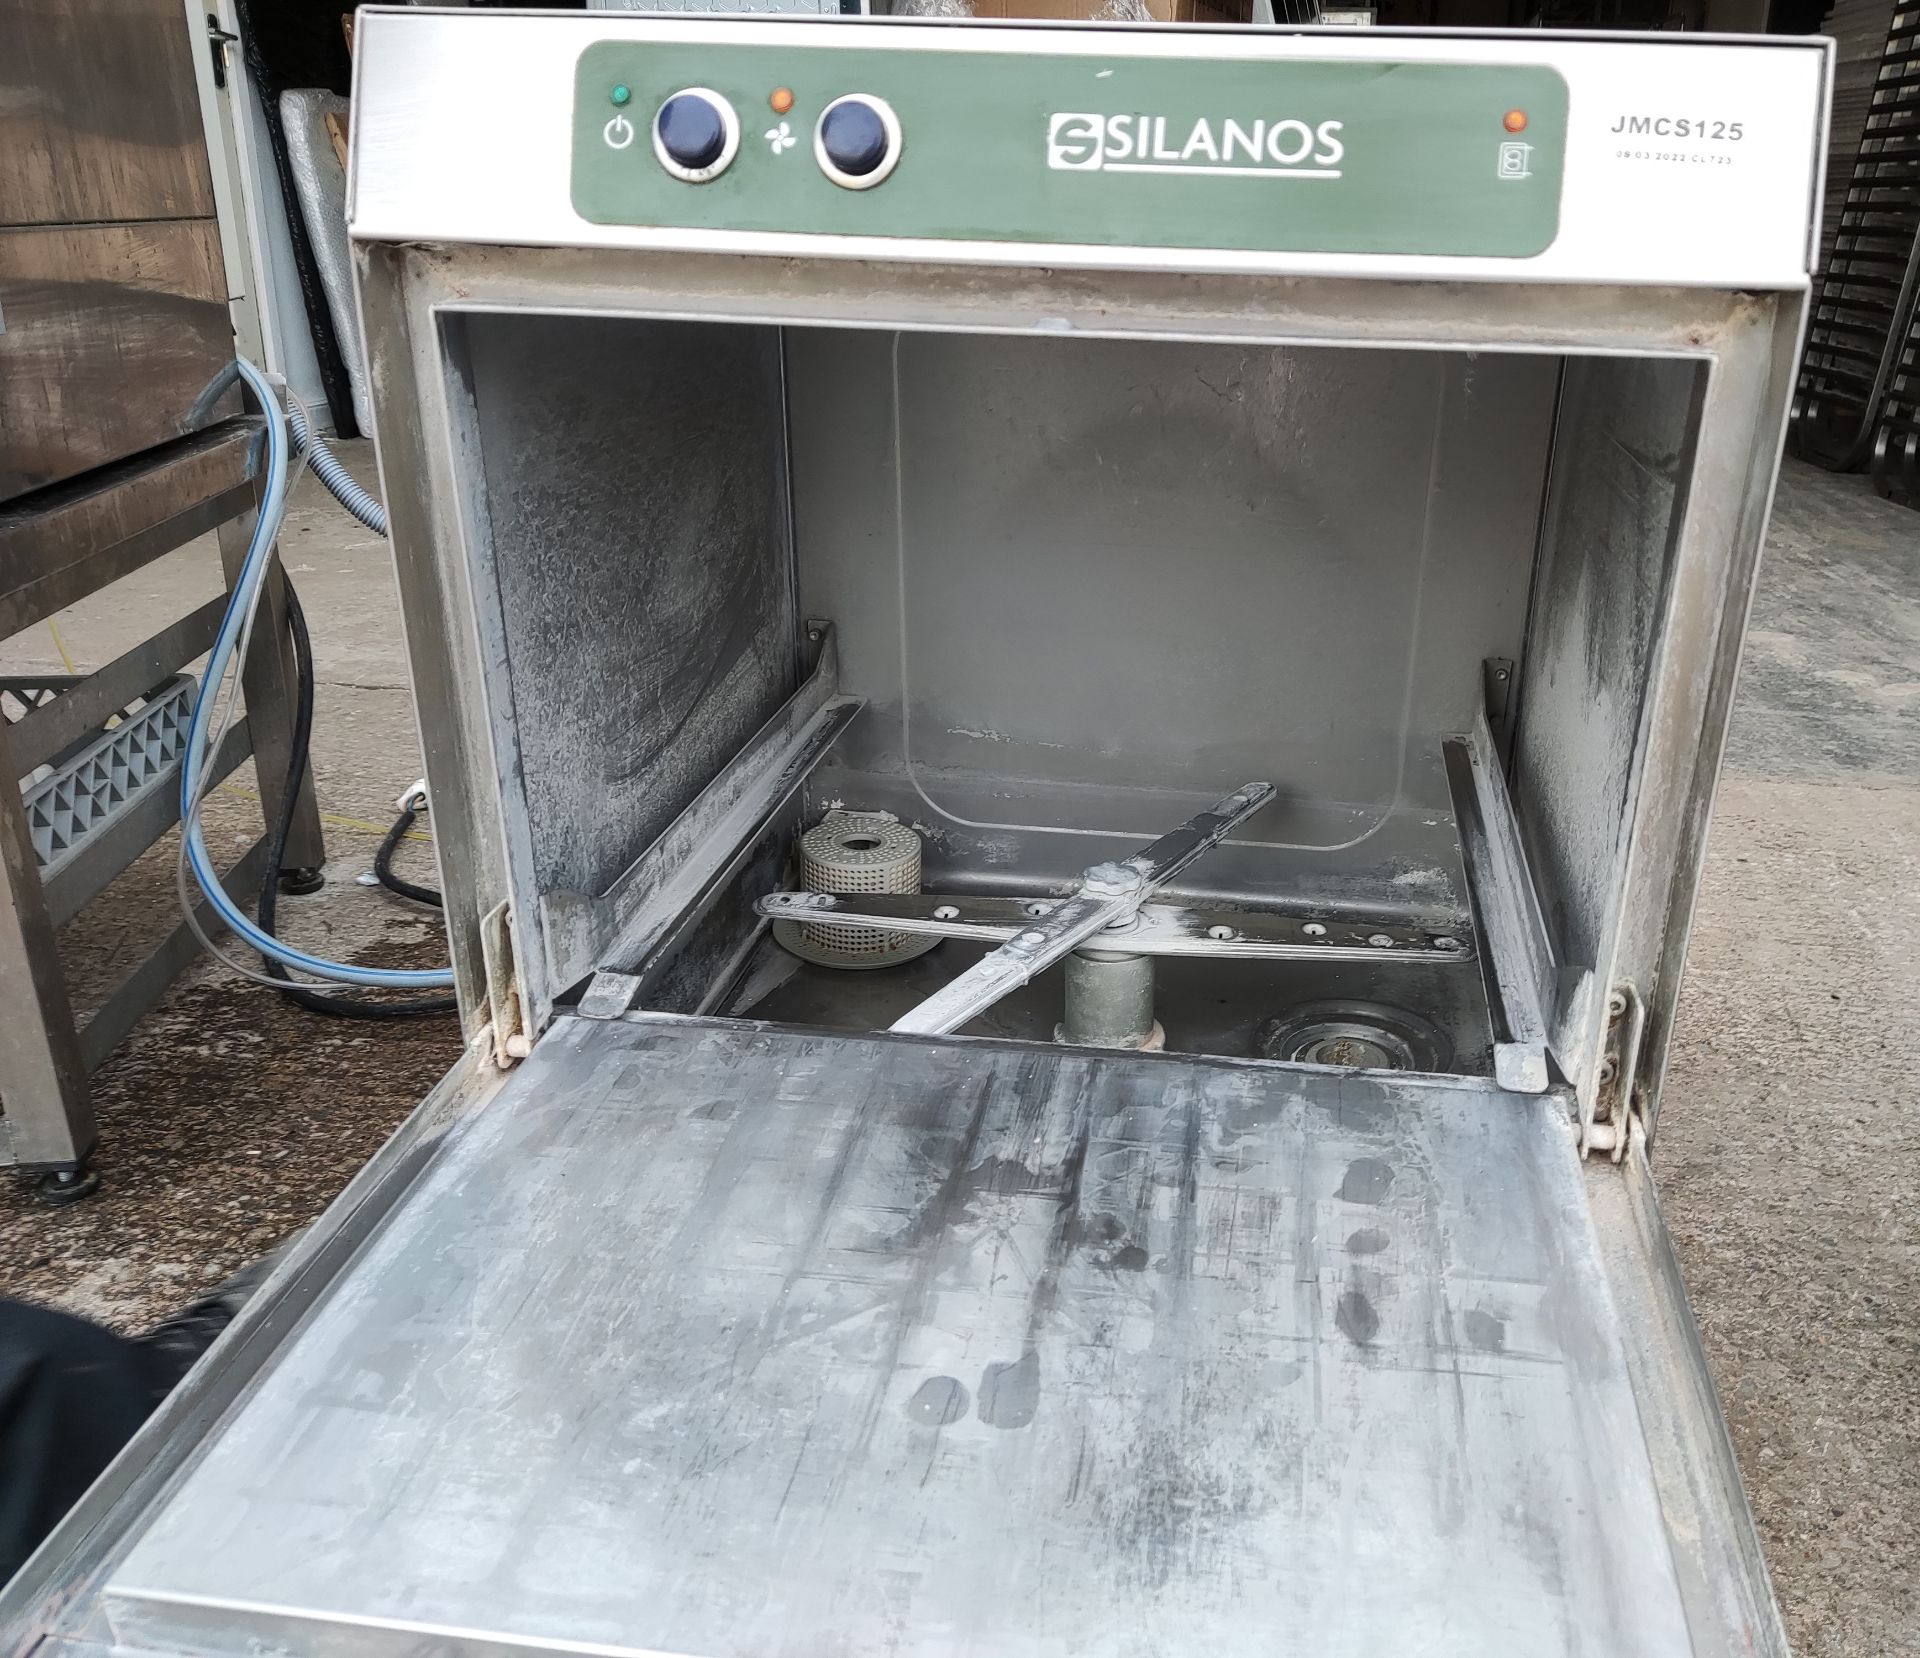 1 x Silanos E40 ECO Undercounter Glass Washer with Low Stand - JMCS125 - CL723 - Location: Altrincha - Image 3 of 12